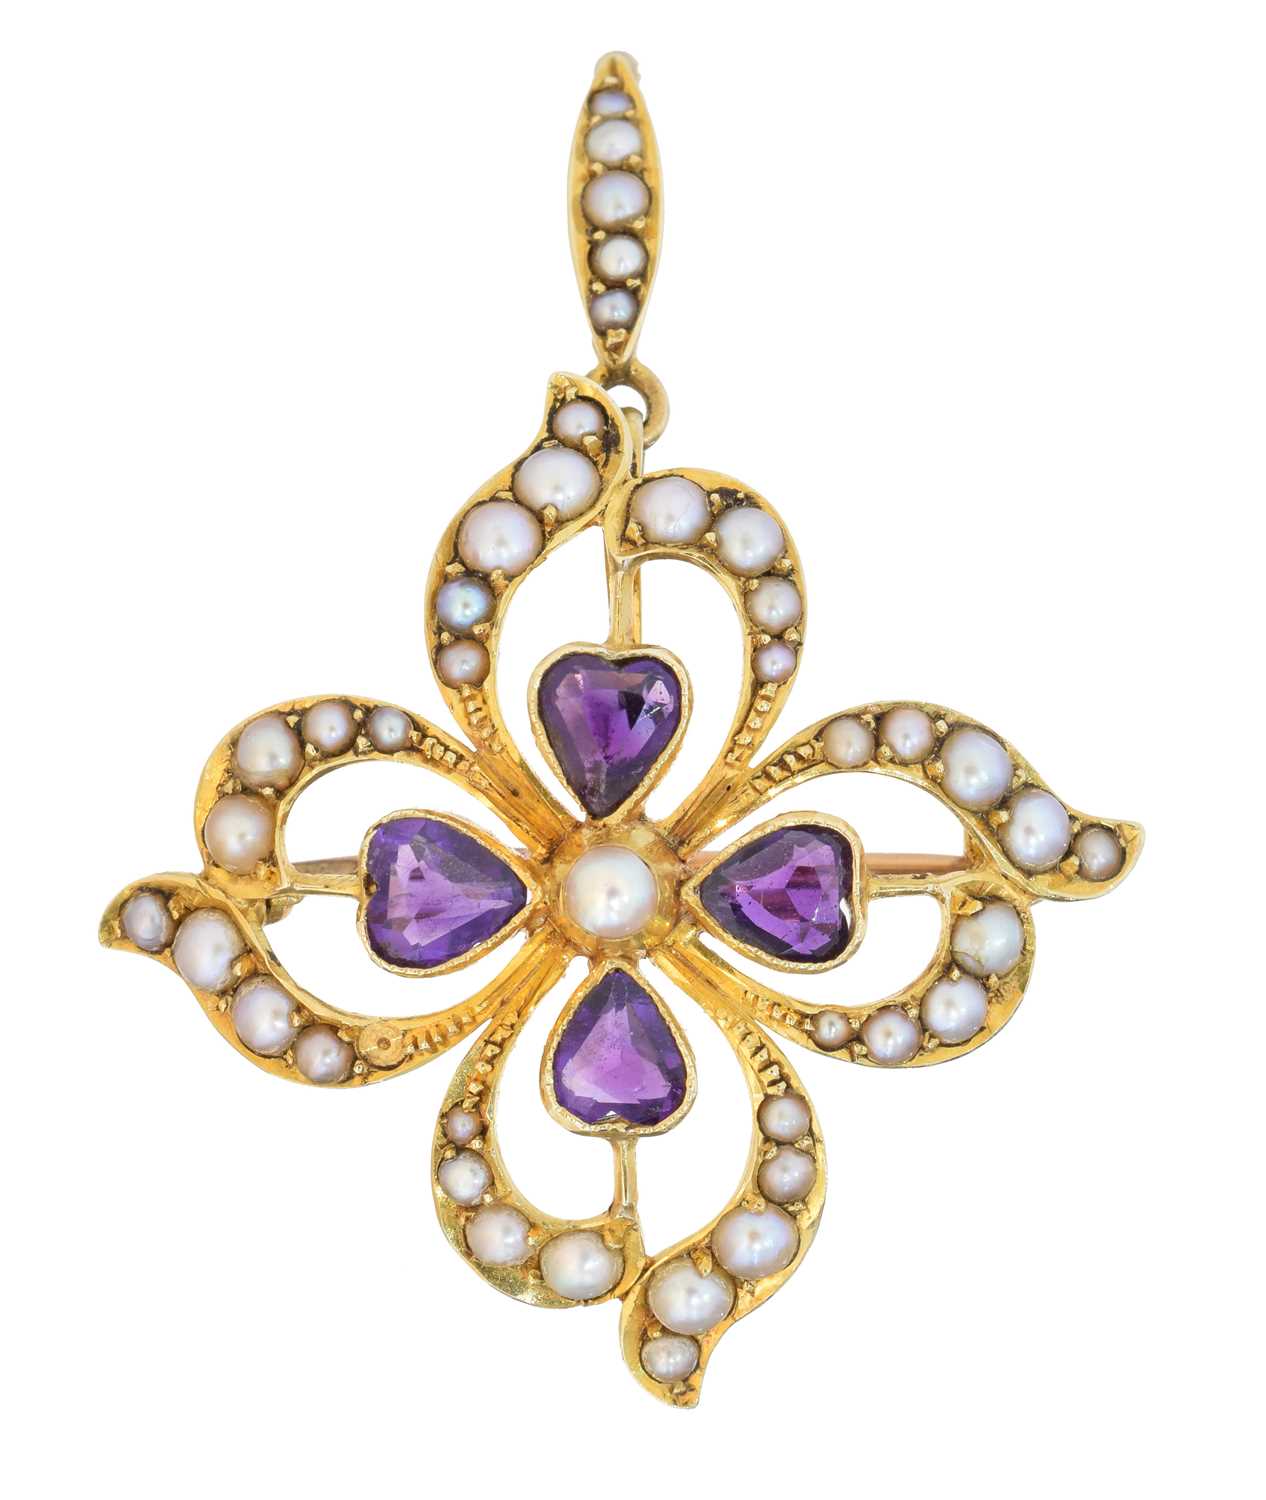 Lot 59 - An early 20th century amethyst and split pearl pendant